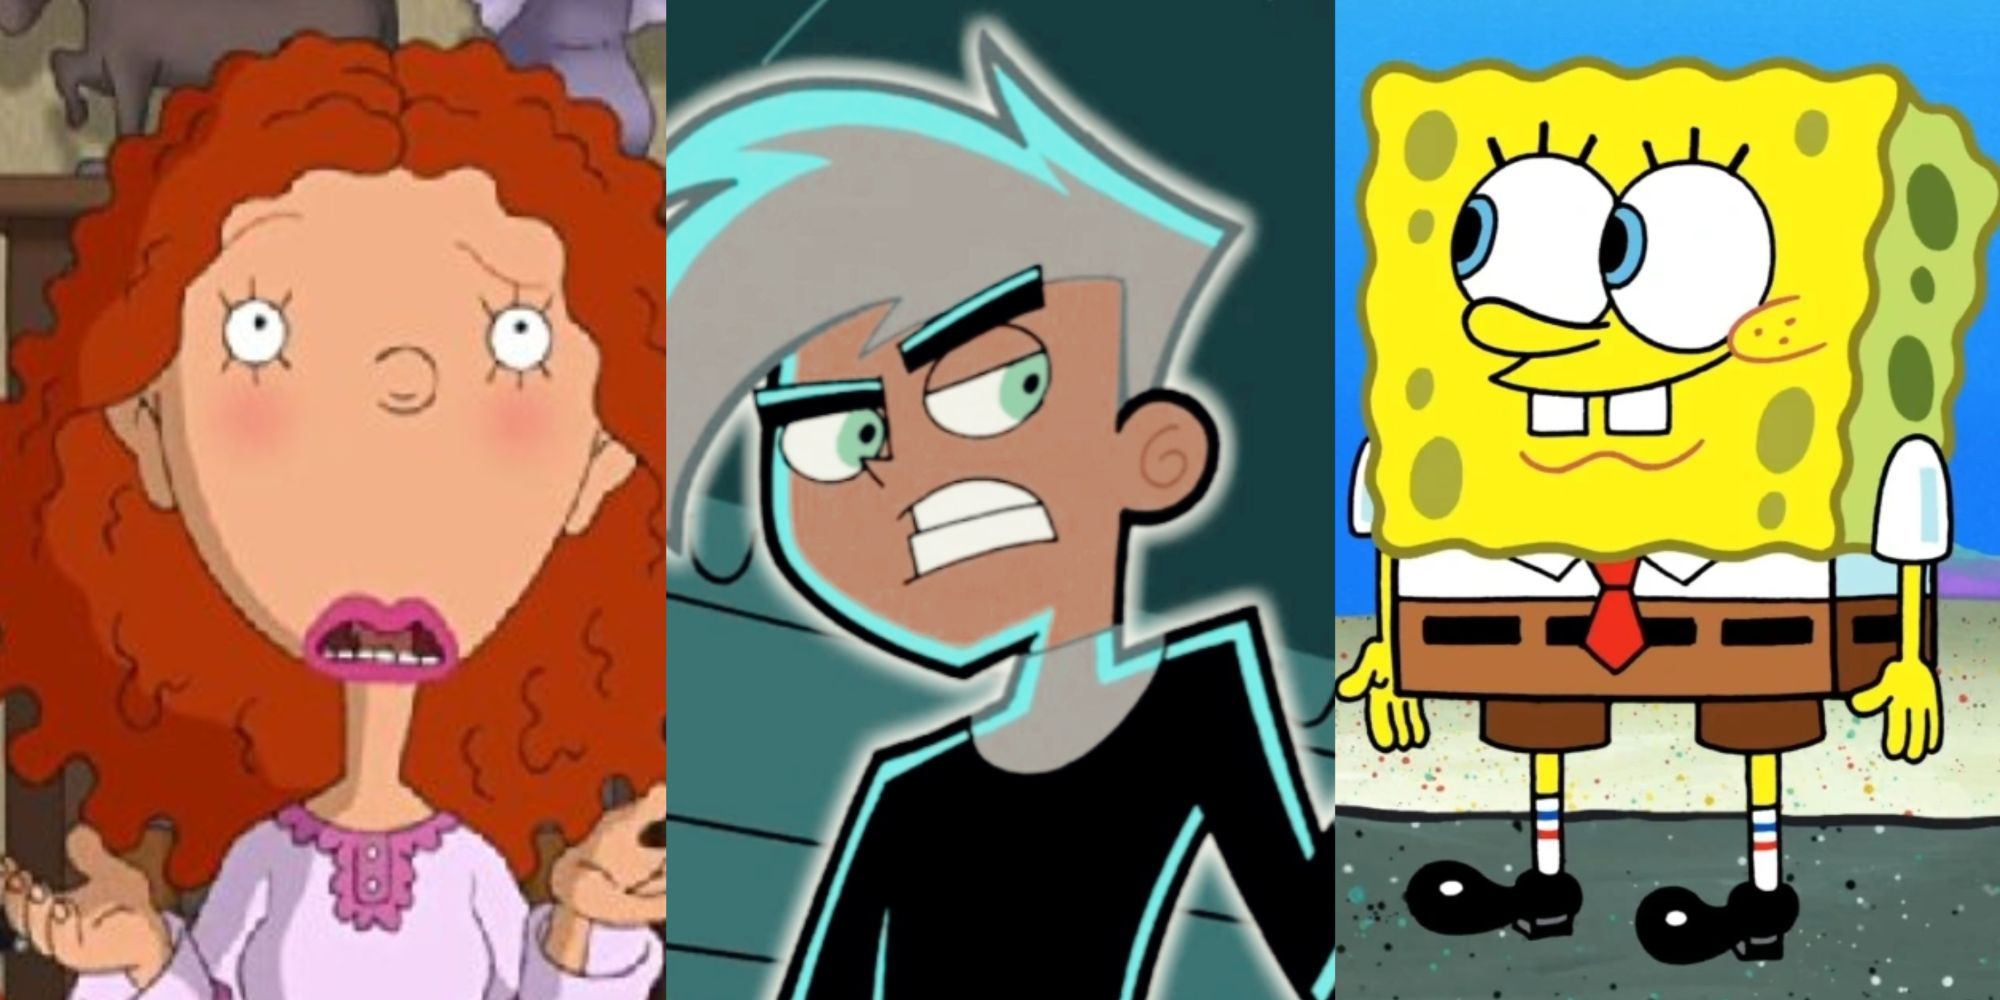 Split Image Ginger From As Told By GIner, Danny from Danny Phantom, and Spongebob